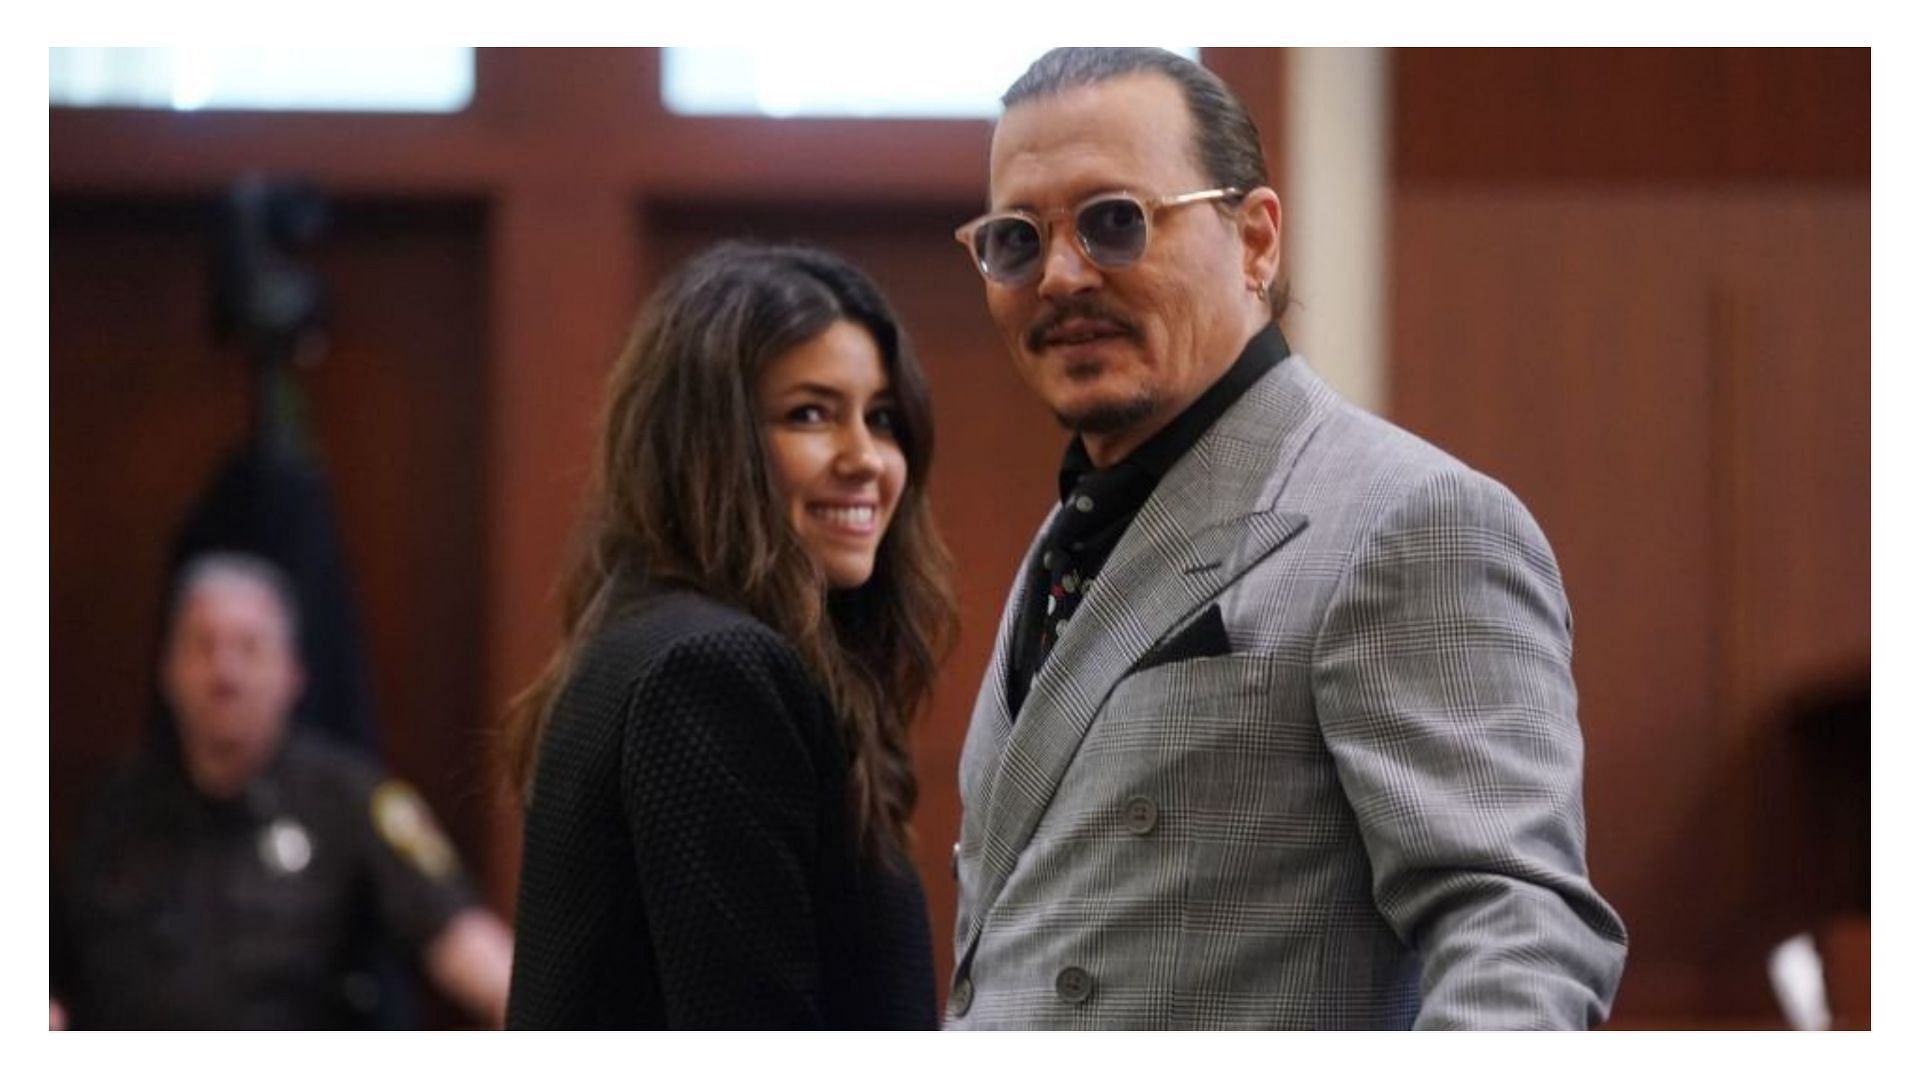 There have been rumors stating that Johnny Depp and Camille Vasquez are dating (Image via Shawn Thew/Getty Images)